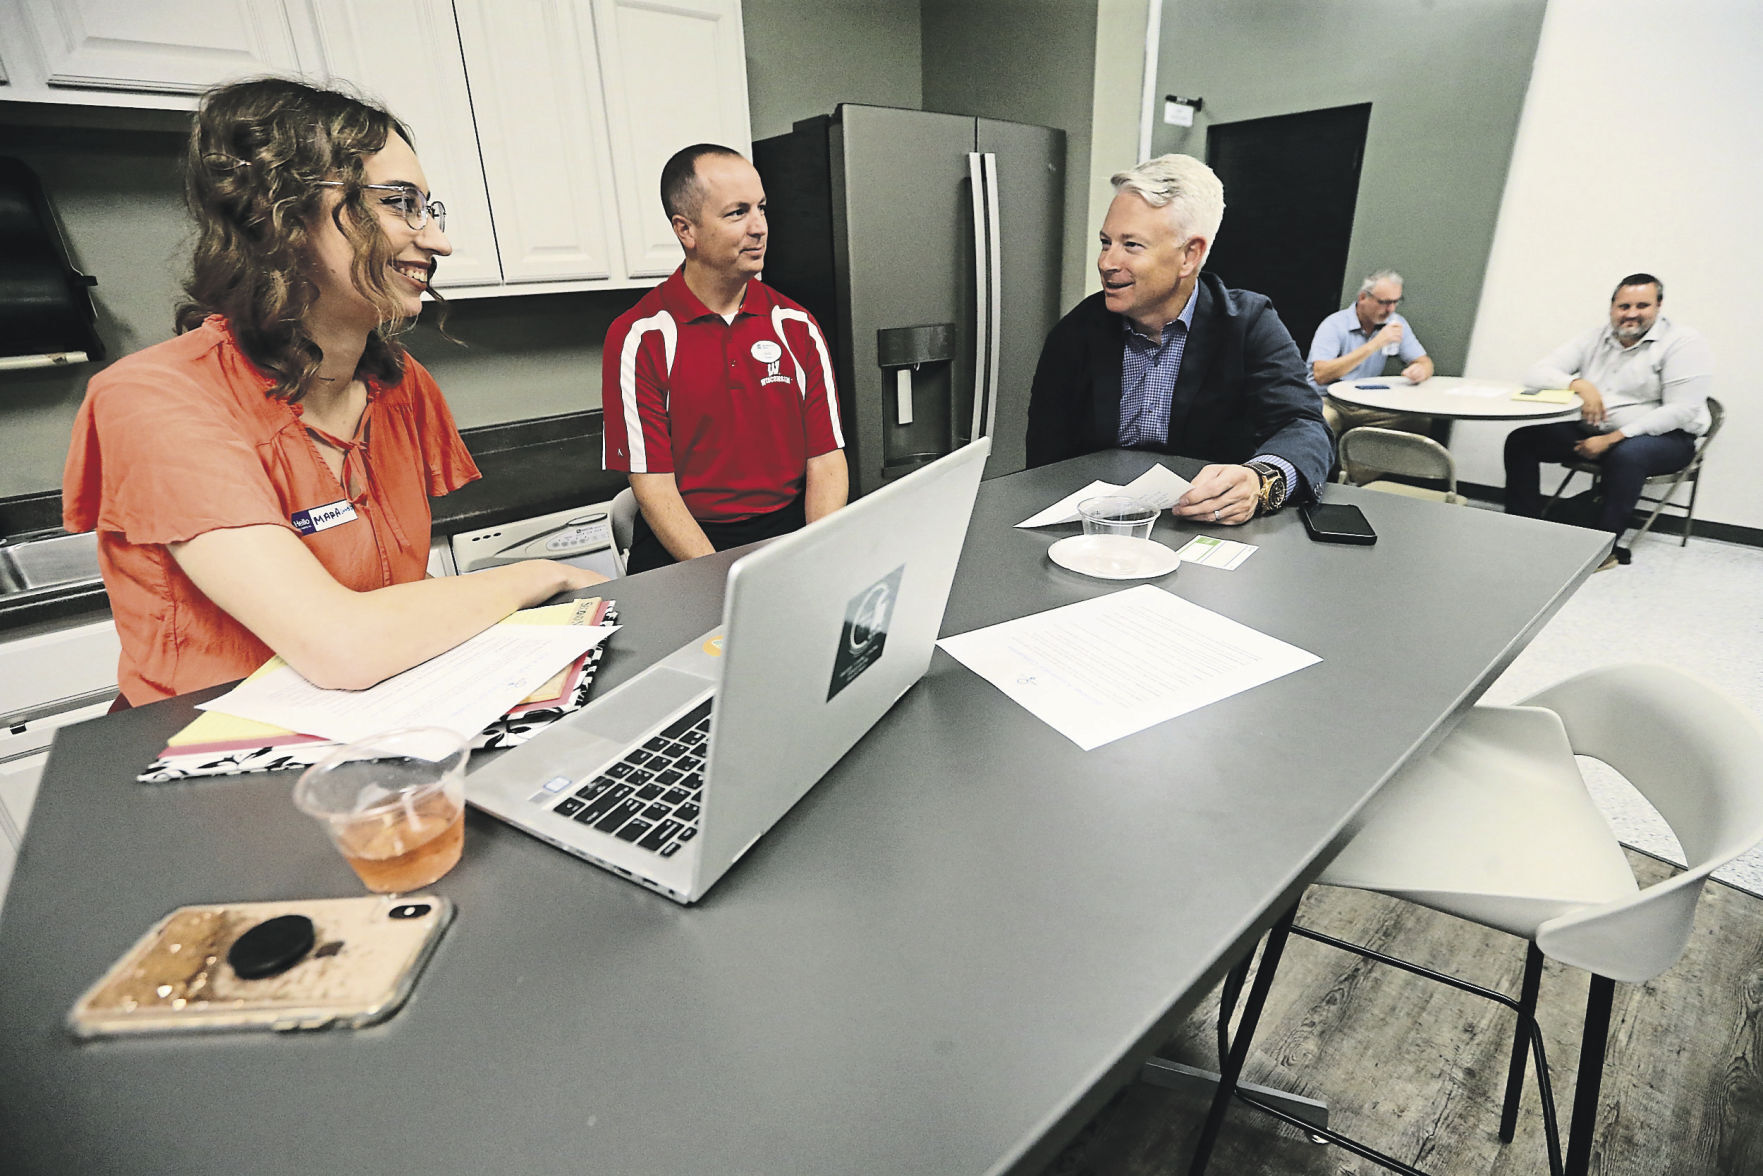 Mara Keyes (from left), Nicholas Felder and John Miller discuss ideas during the grand opening of the Innovation Driving Entrepreneurship Accelerator Hub, known as the IDEA Hub, at Platteville Business Incubator in Platteville, Wis., on Monday, Oct. 4, 2021.    PHOTO CREDIT: JESSICA REILLY